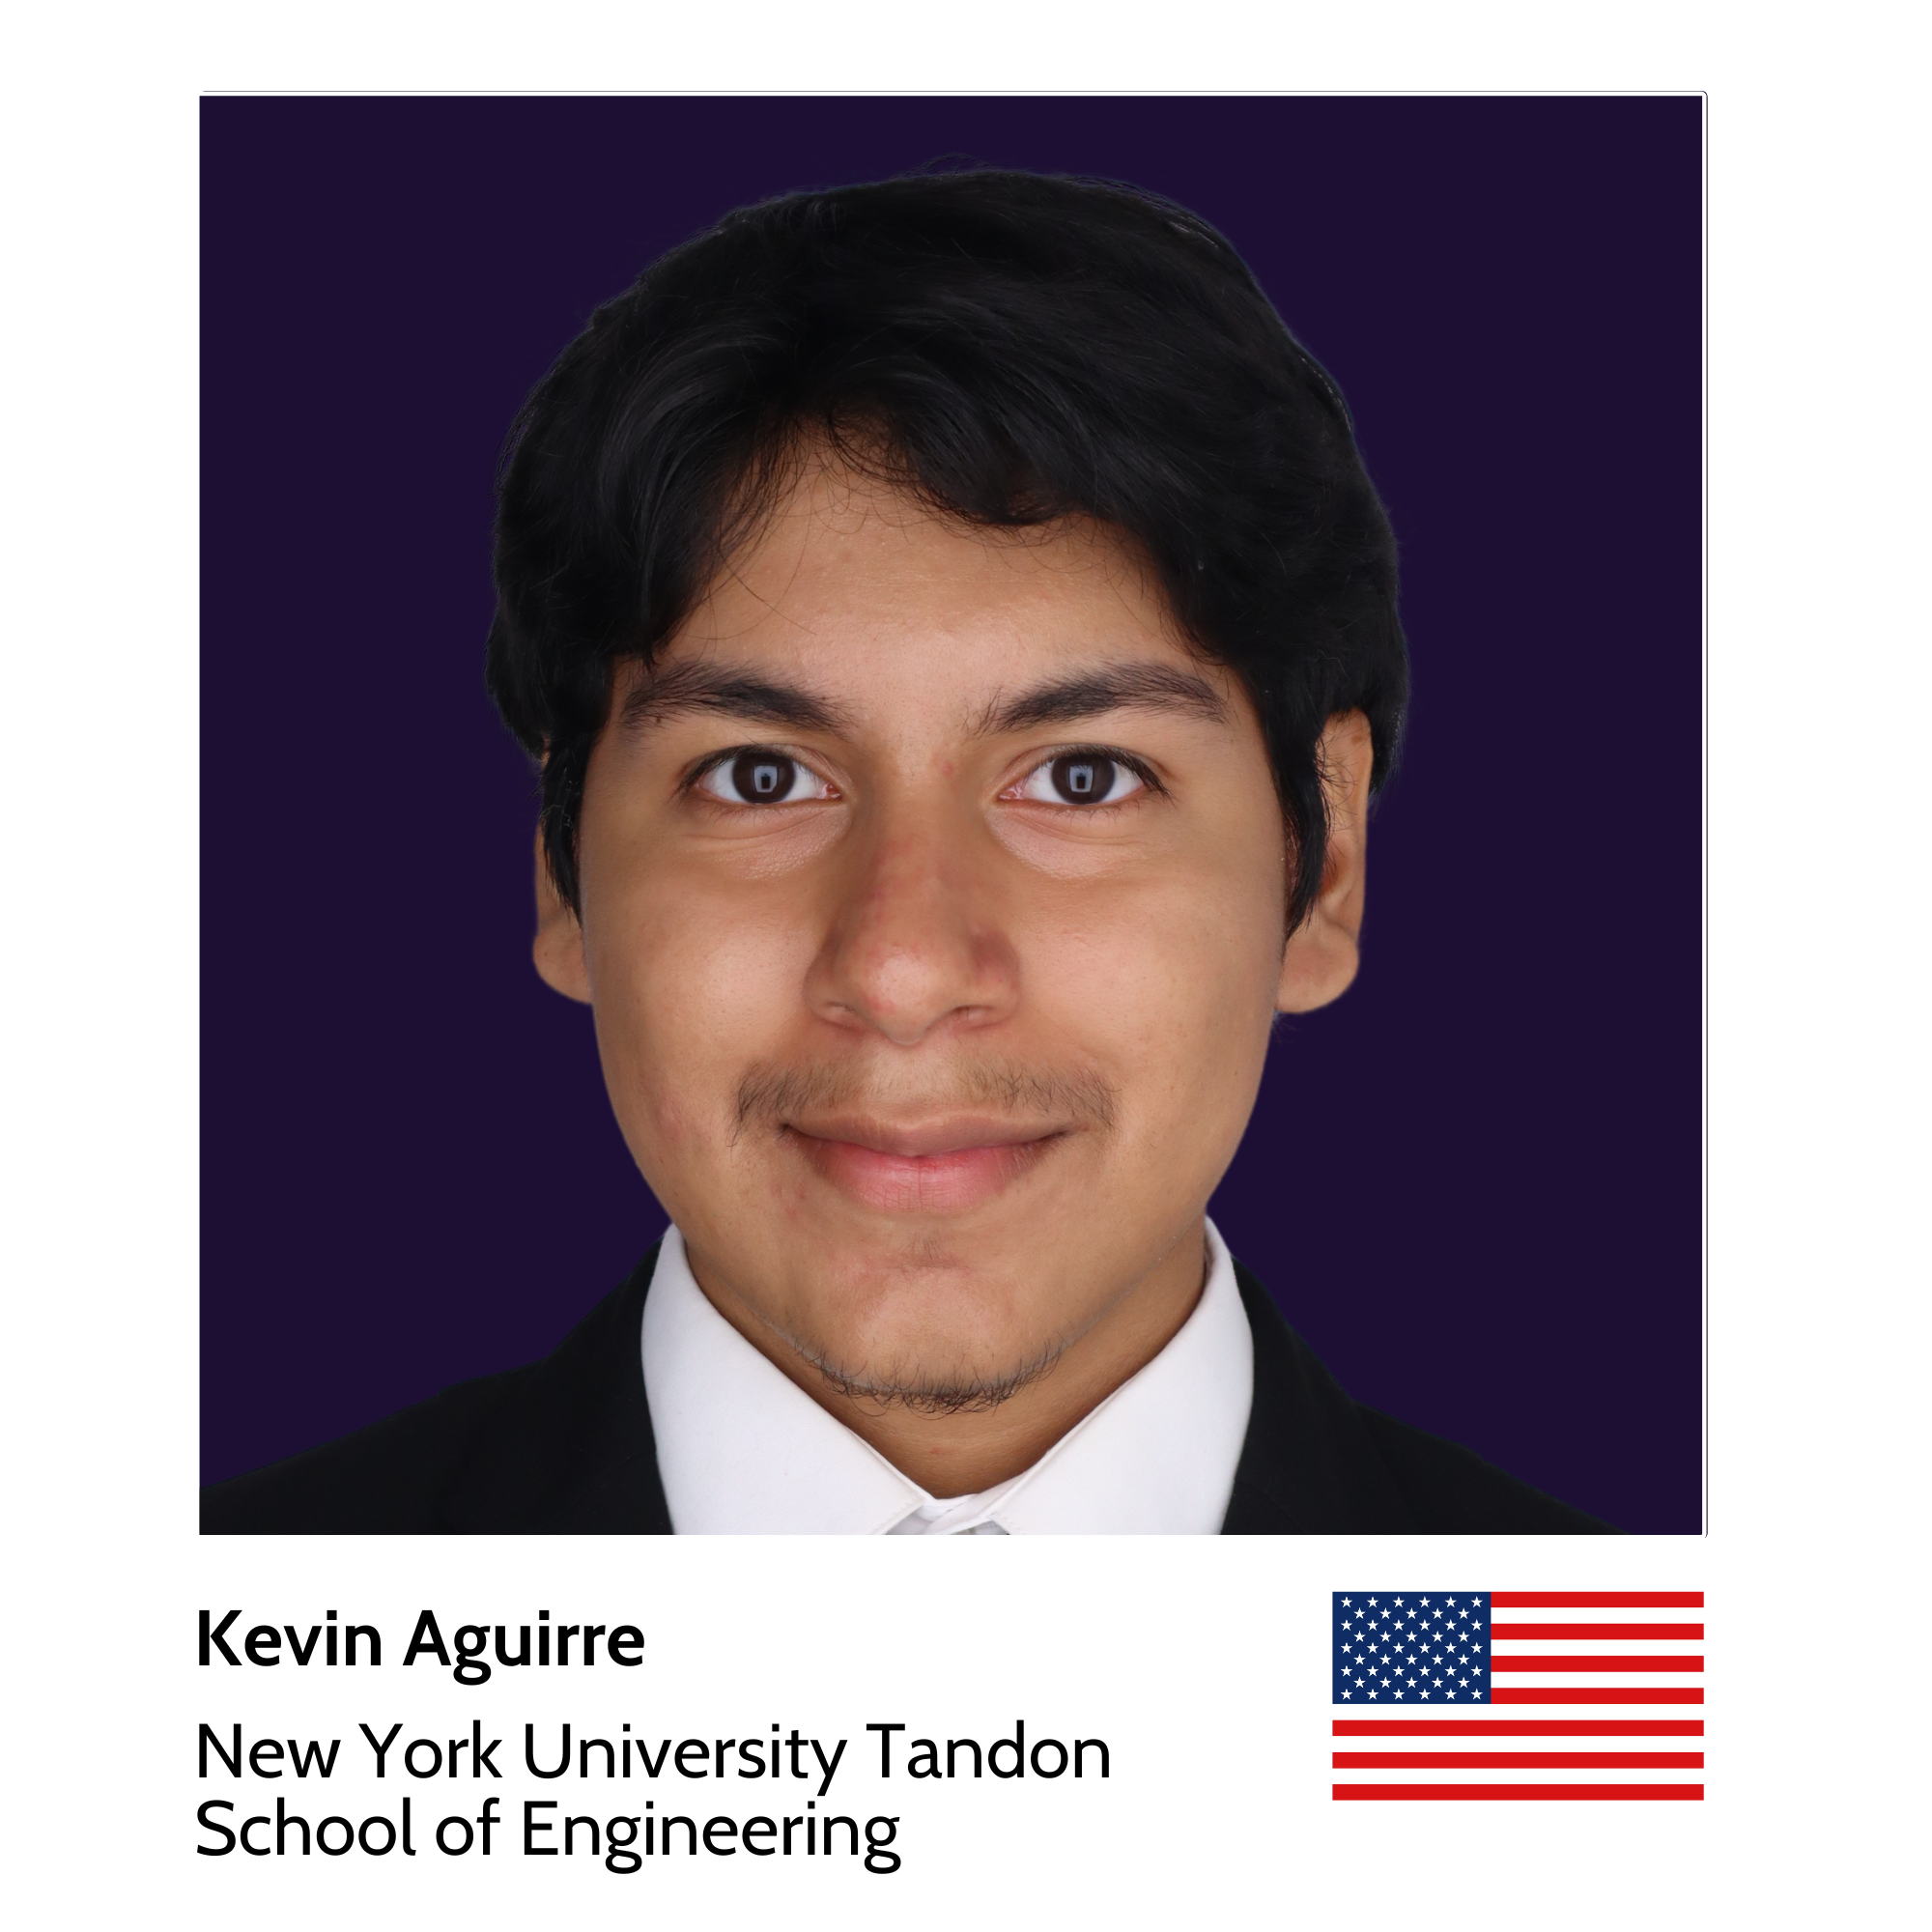 Your_Big_Year_ibm_z_student_ambassador_Kevin_Aguirre_New_York_University_Tandon_School_of_Engineering.png